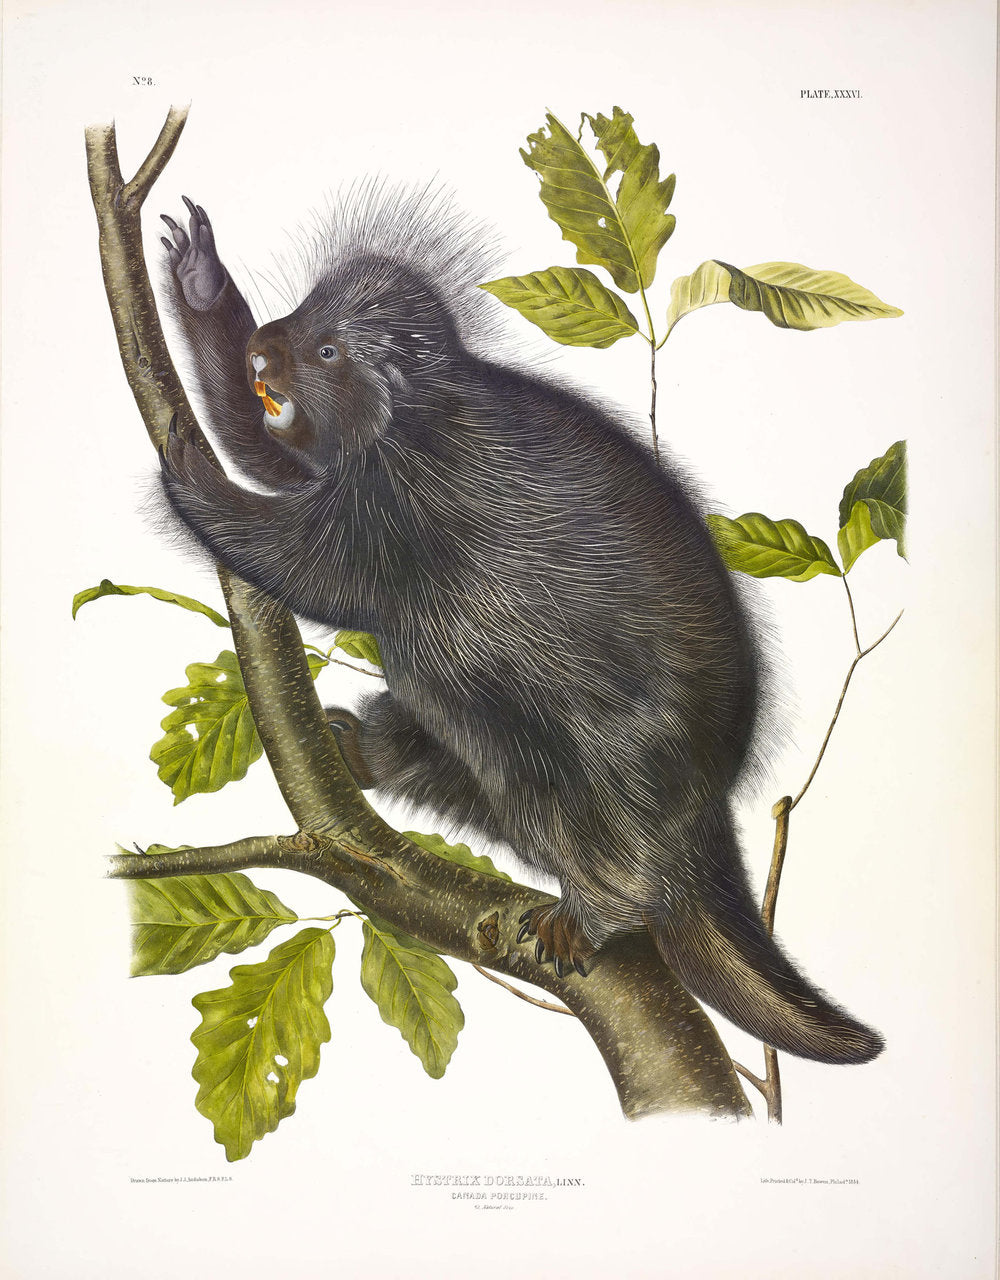 Painted by John James Audubon (1785-1851) with background likely by Victor Gifford Audubon (1809-1860)  Plate XXXVI - Canada Porcupine  From: Viviparous Quadrupeds of North America  New York: 1845-1848  Hand colored lithograph  Sheet size: 21 ¼” x 27”